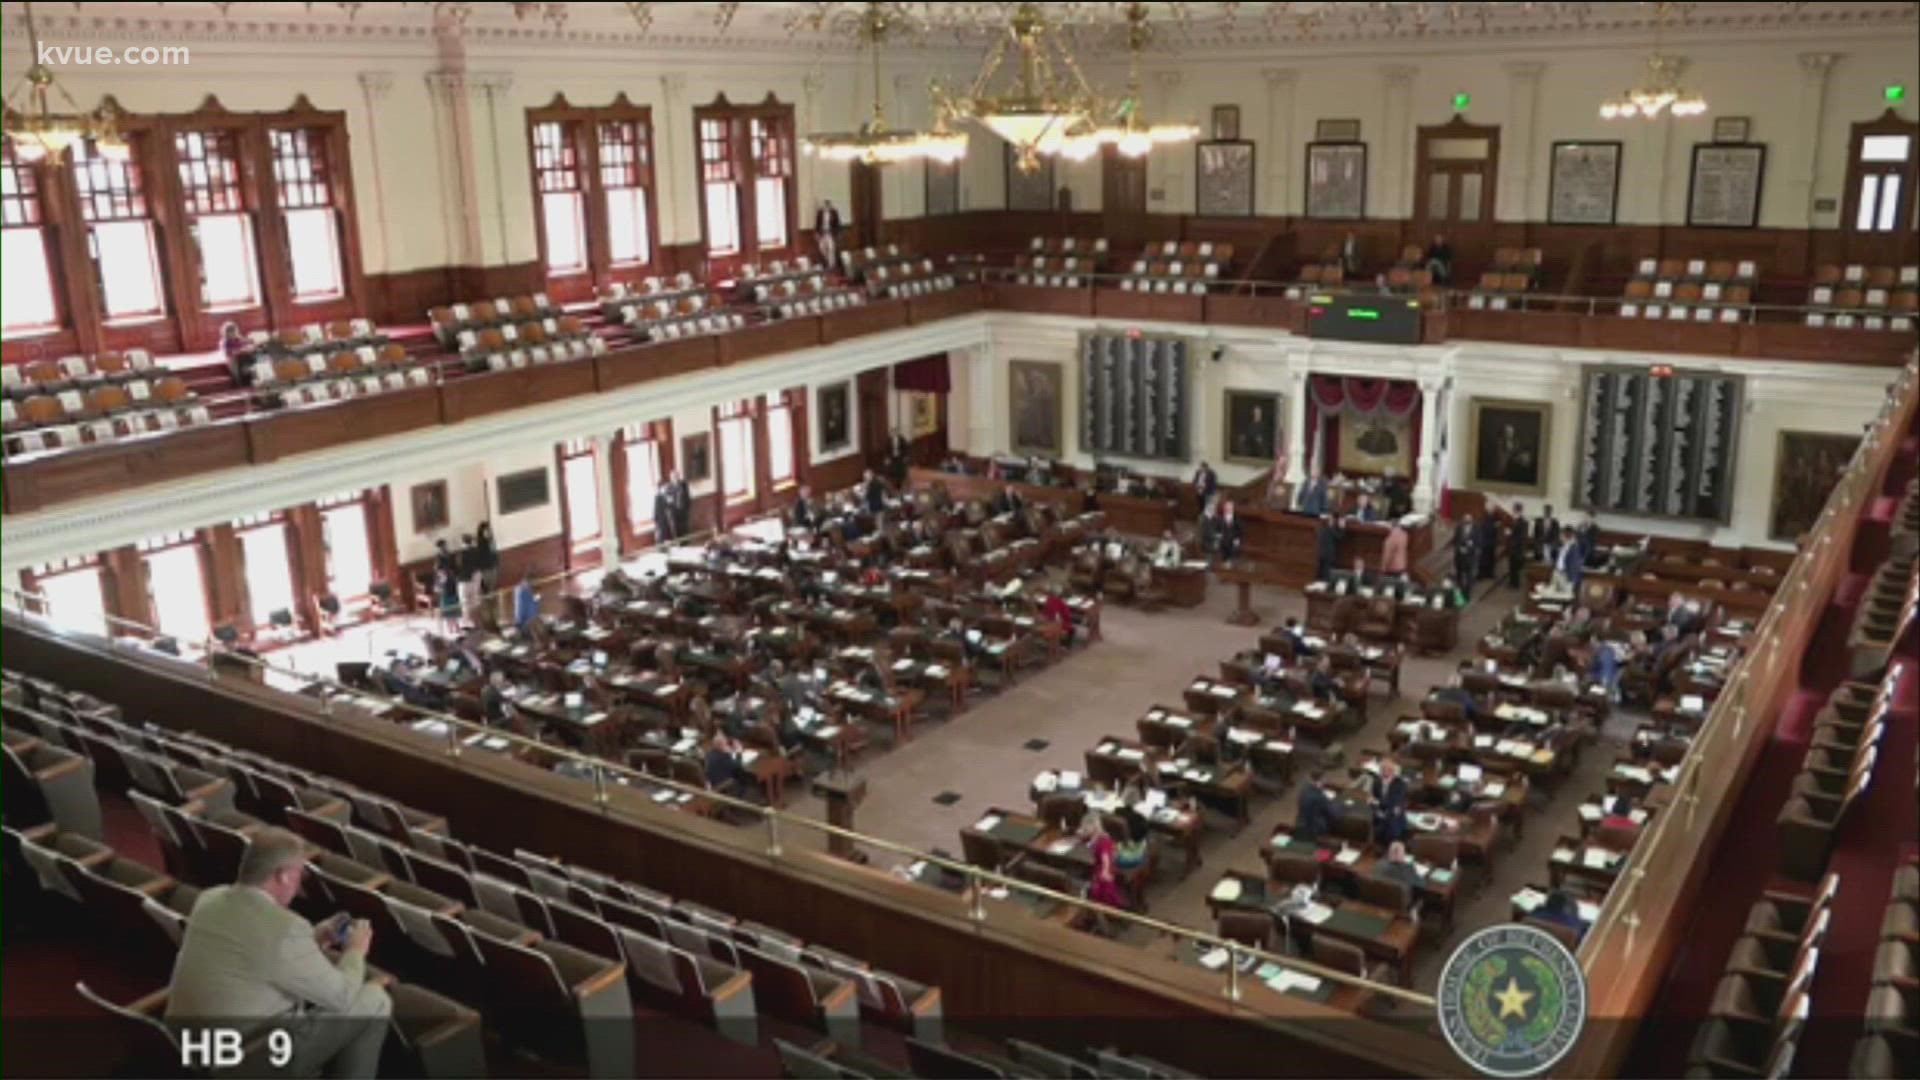 The House voted final approval for SB1 on Friday, 80-41, but the bill won't go directly to Gov. Greg Abbott's desk.